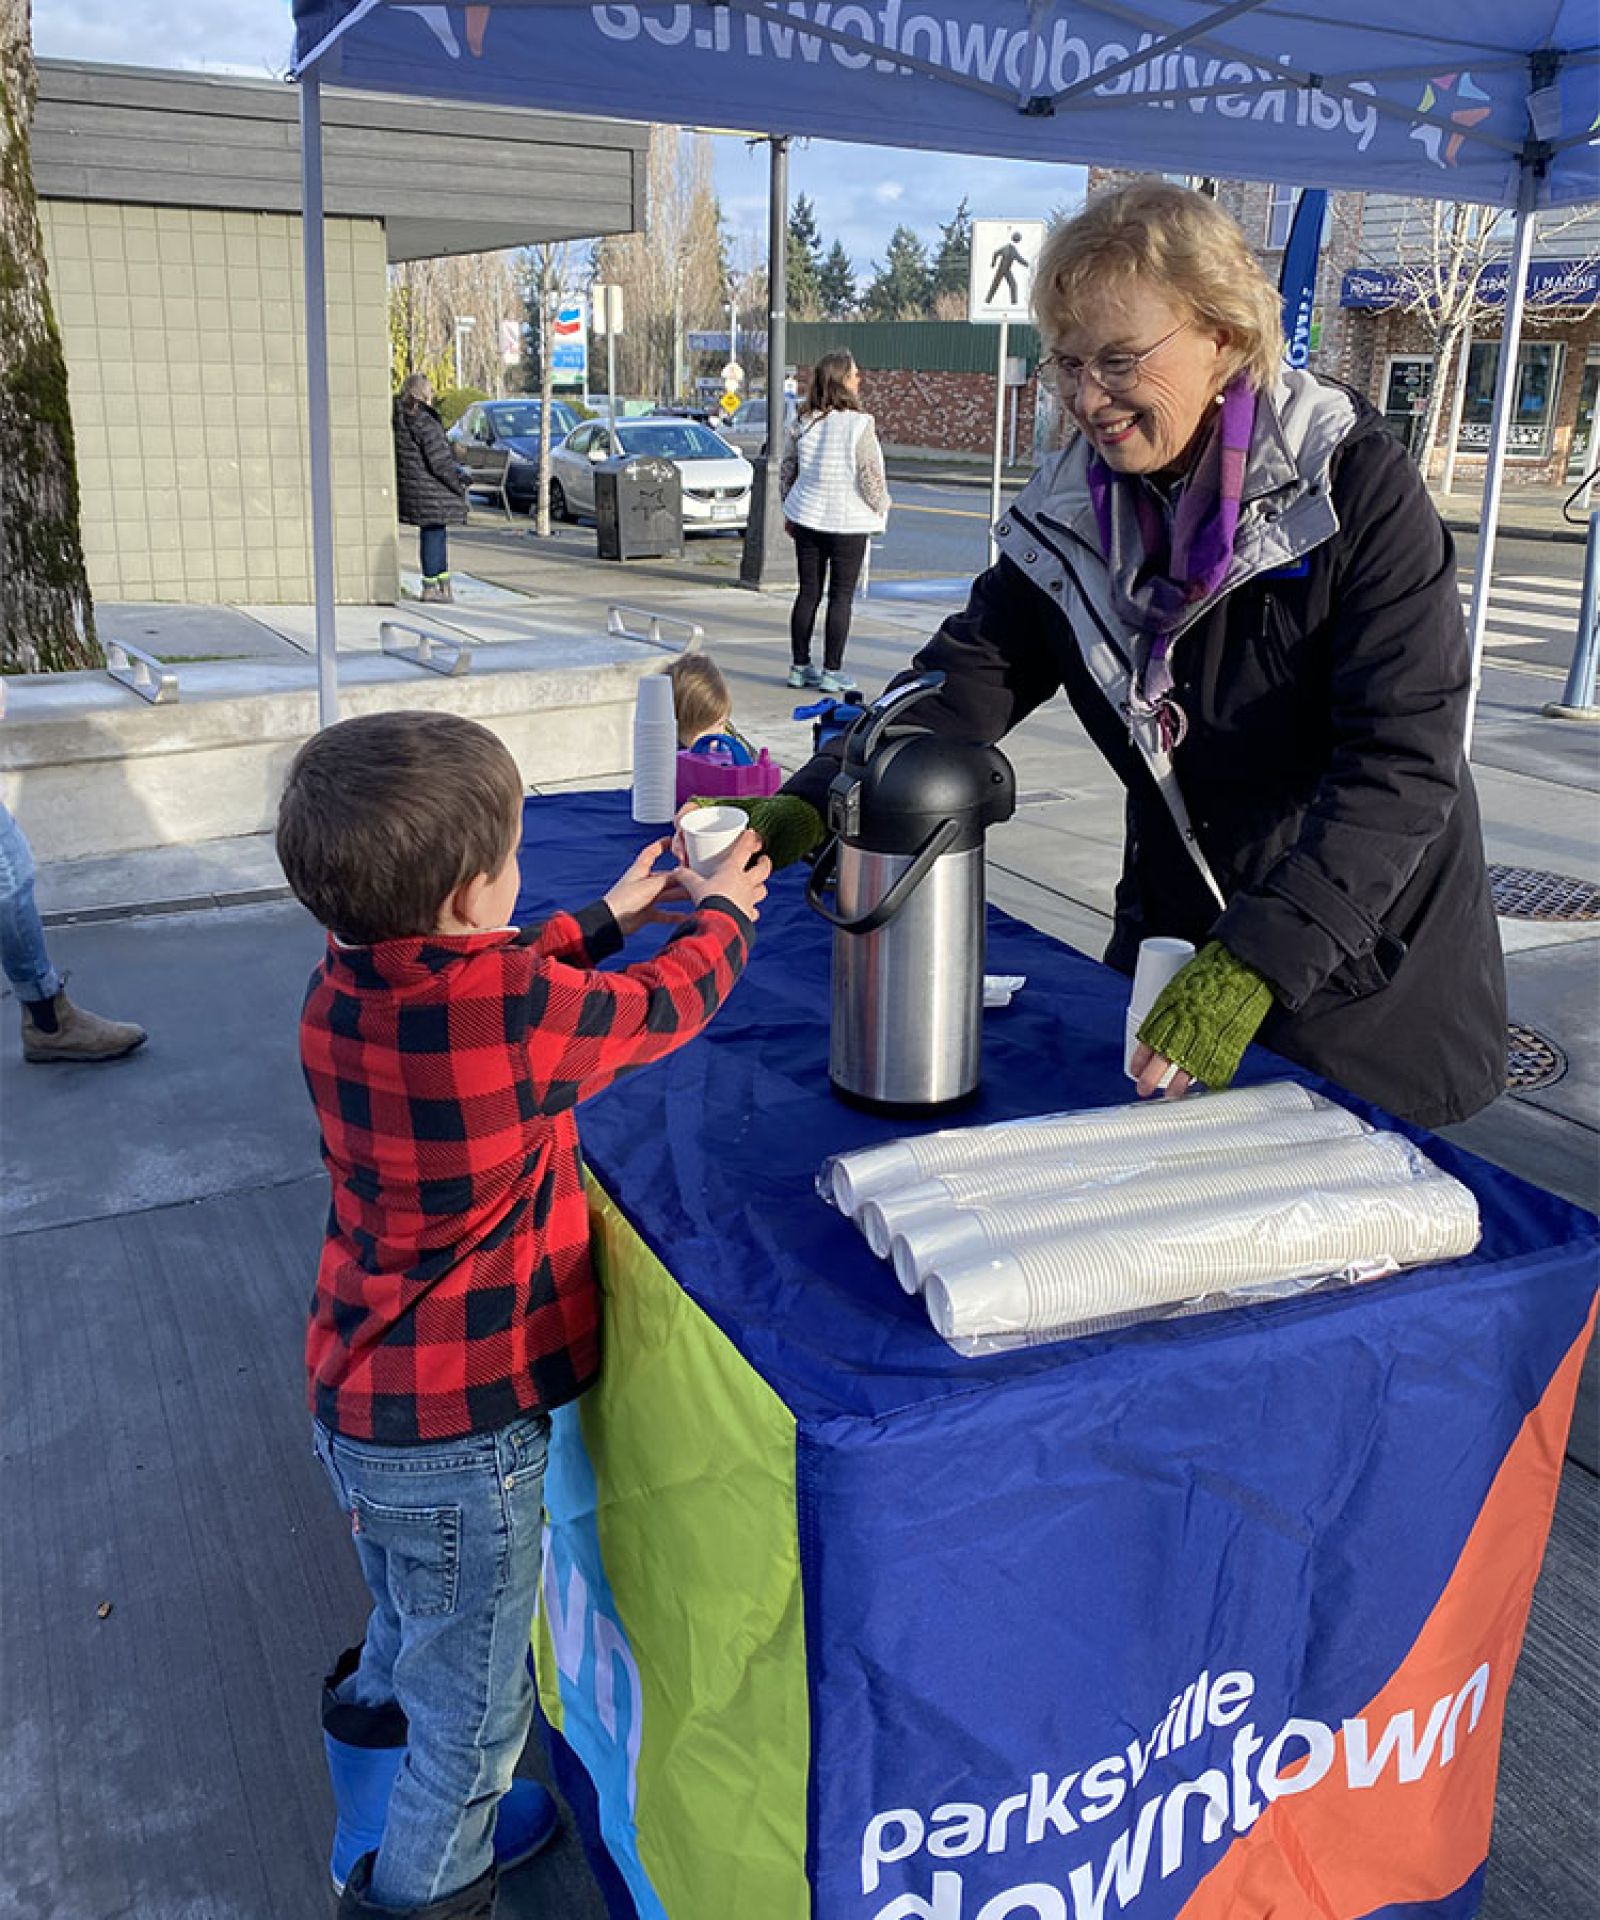 Parksville Downtown volunteer helping child in downtown Parksville